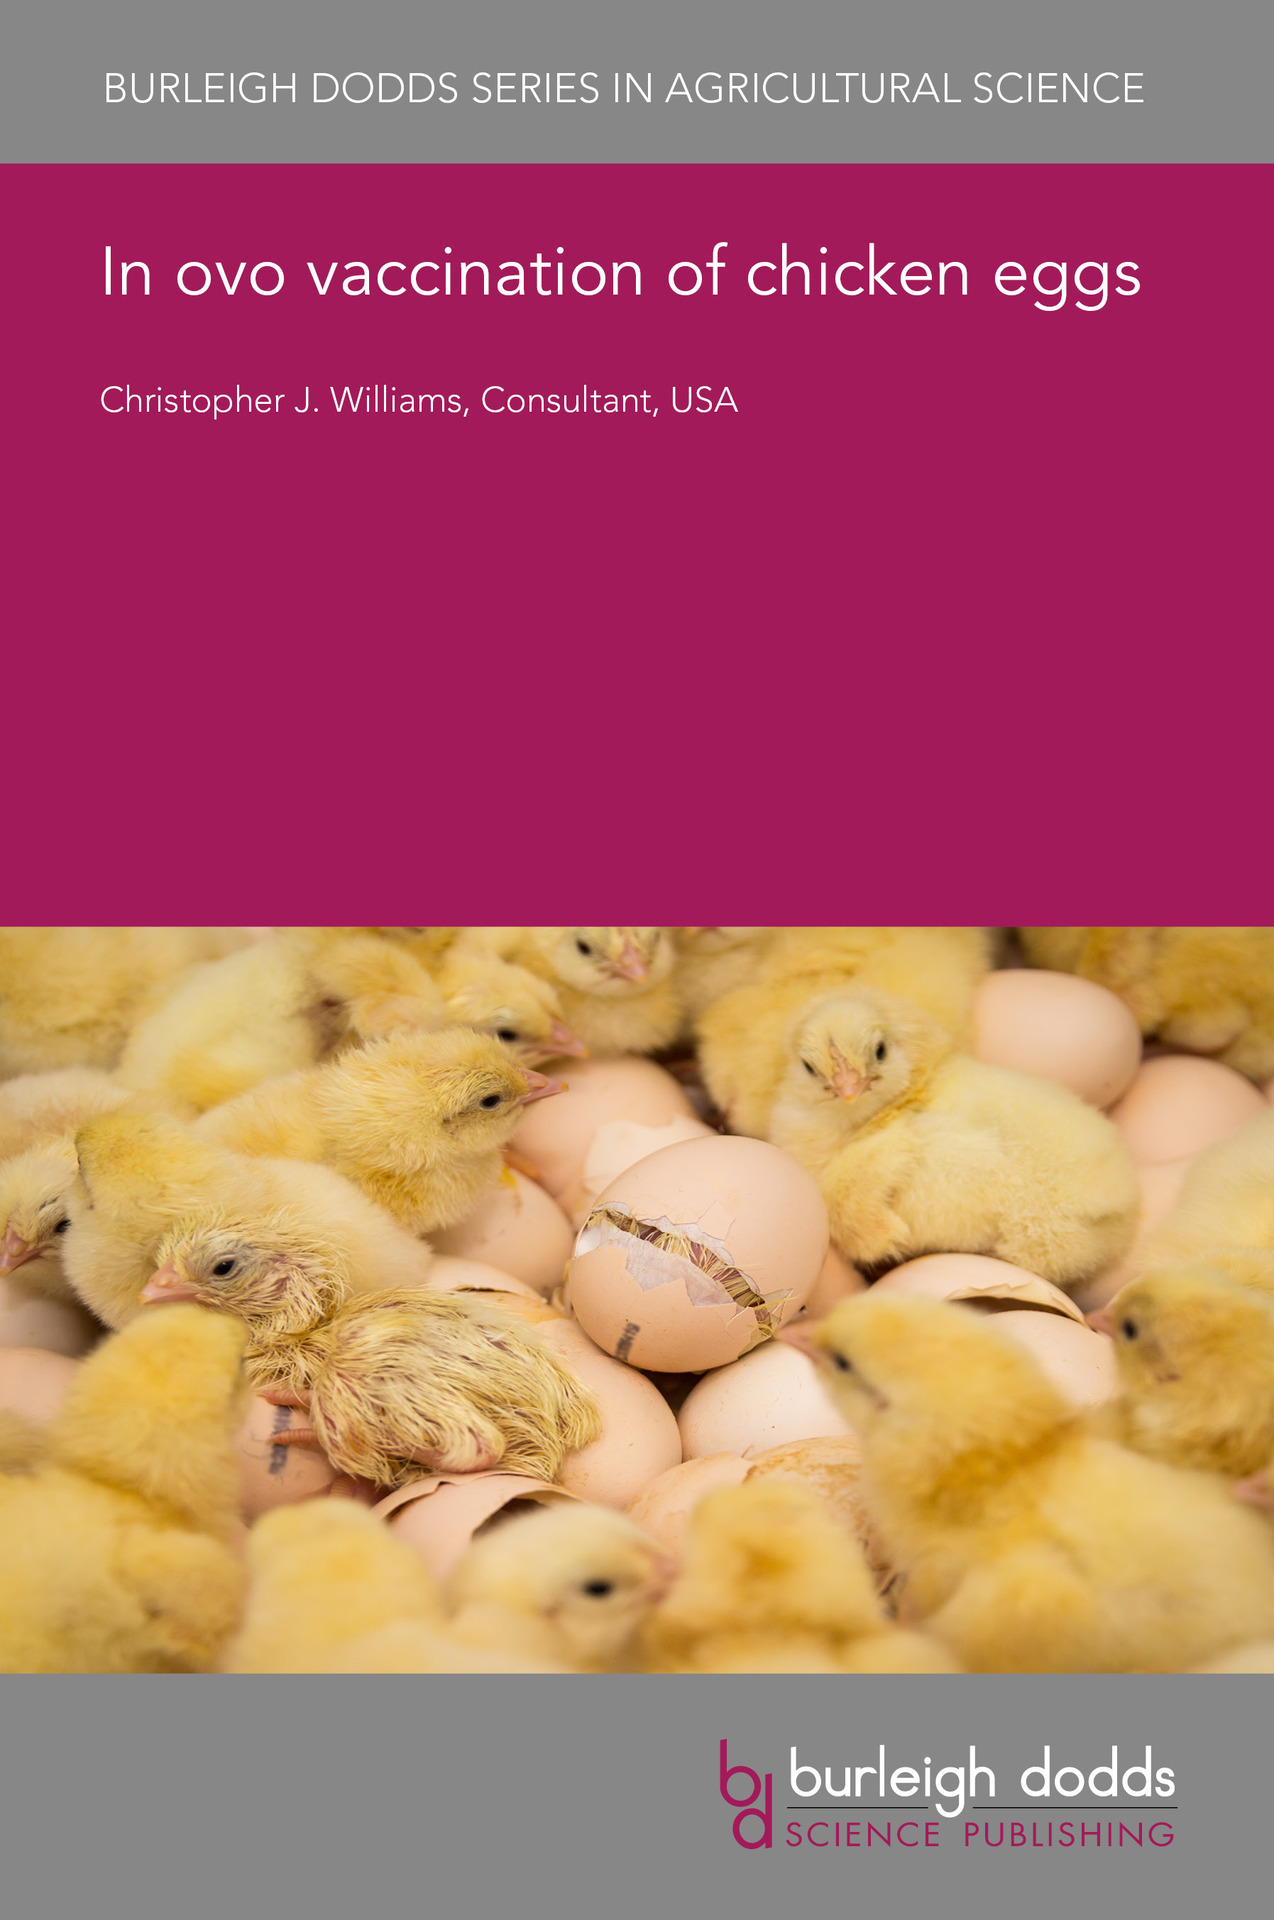 In ovo vaccination of chicken eggs